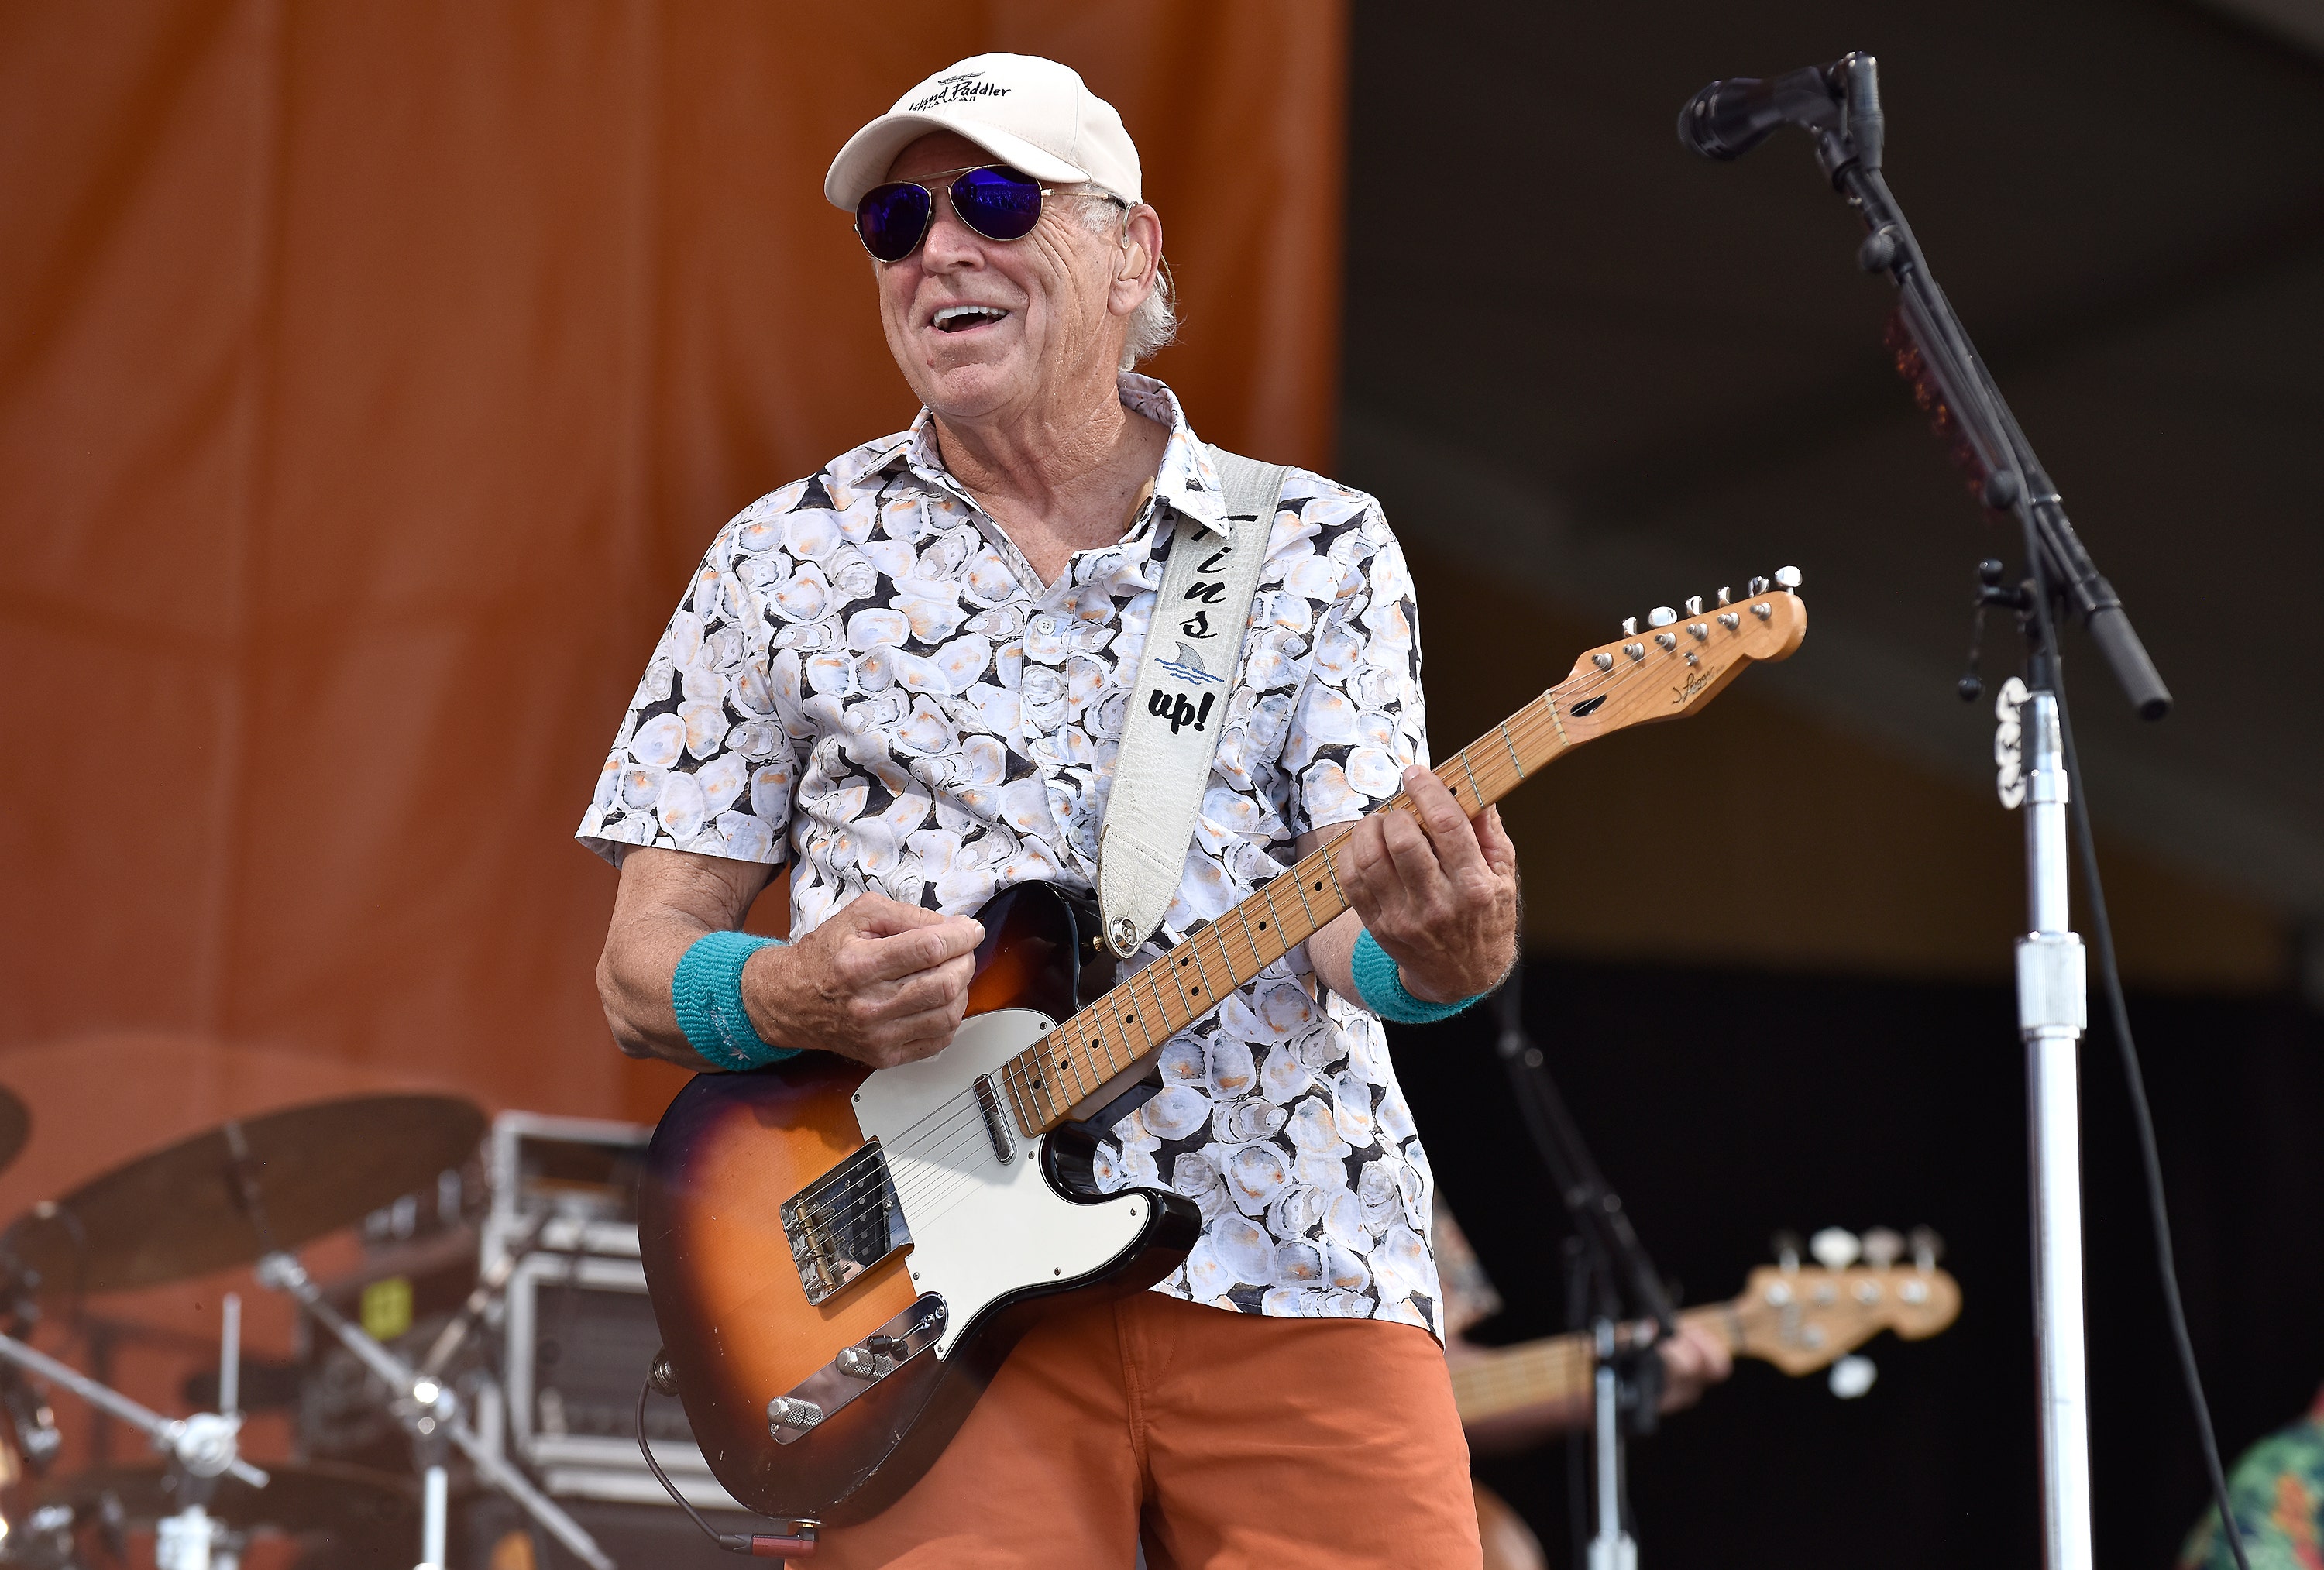 Jimmy Buffet cancels a show and says 'growing old is not for sissies.' (Tim Mosenfelder)